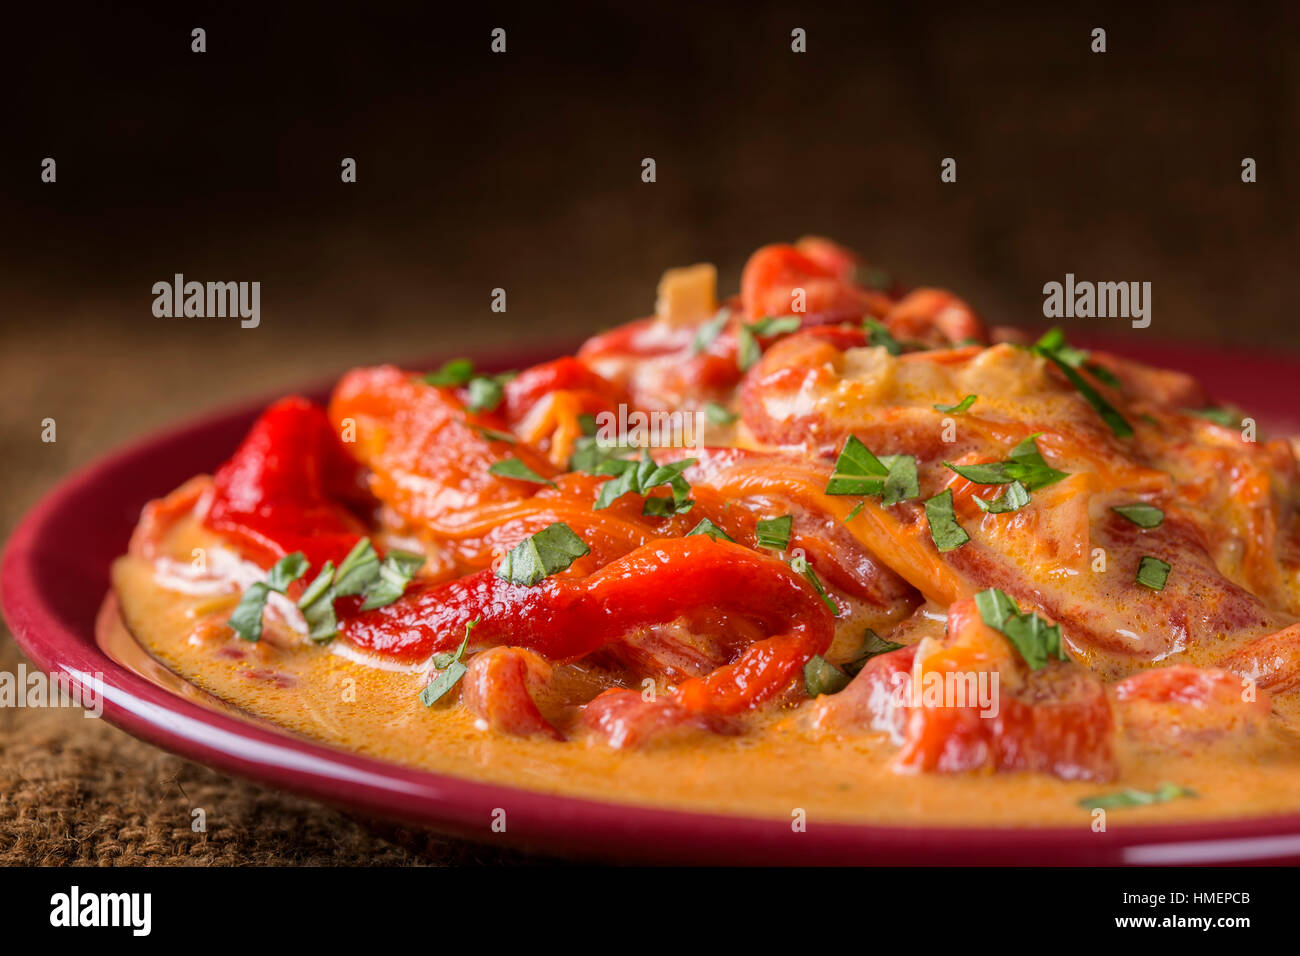 Stew made from backed red peppers with sour cream and parsley on plate Stock Photo